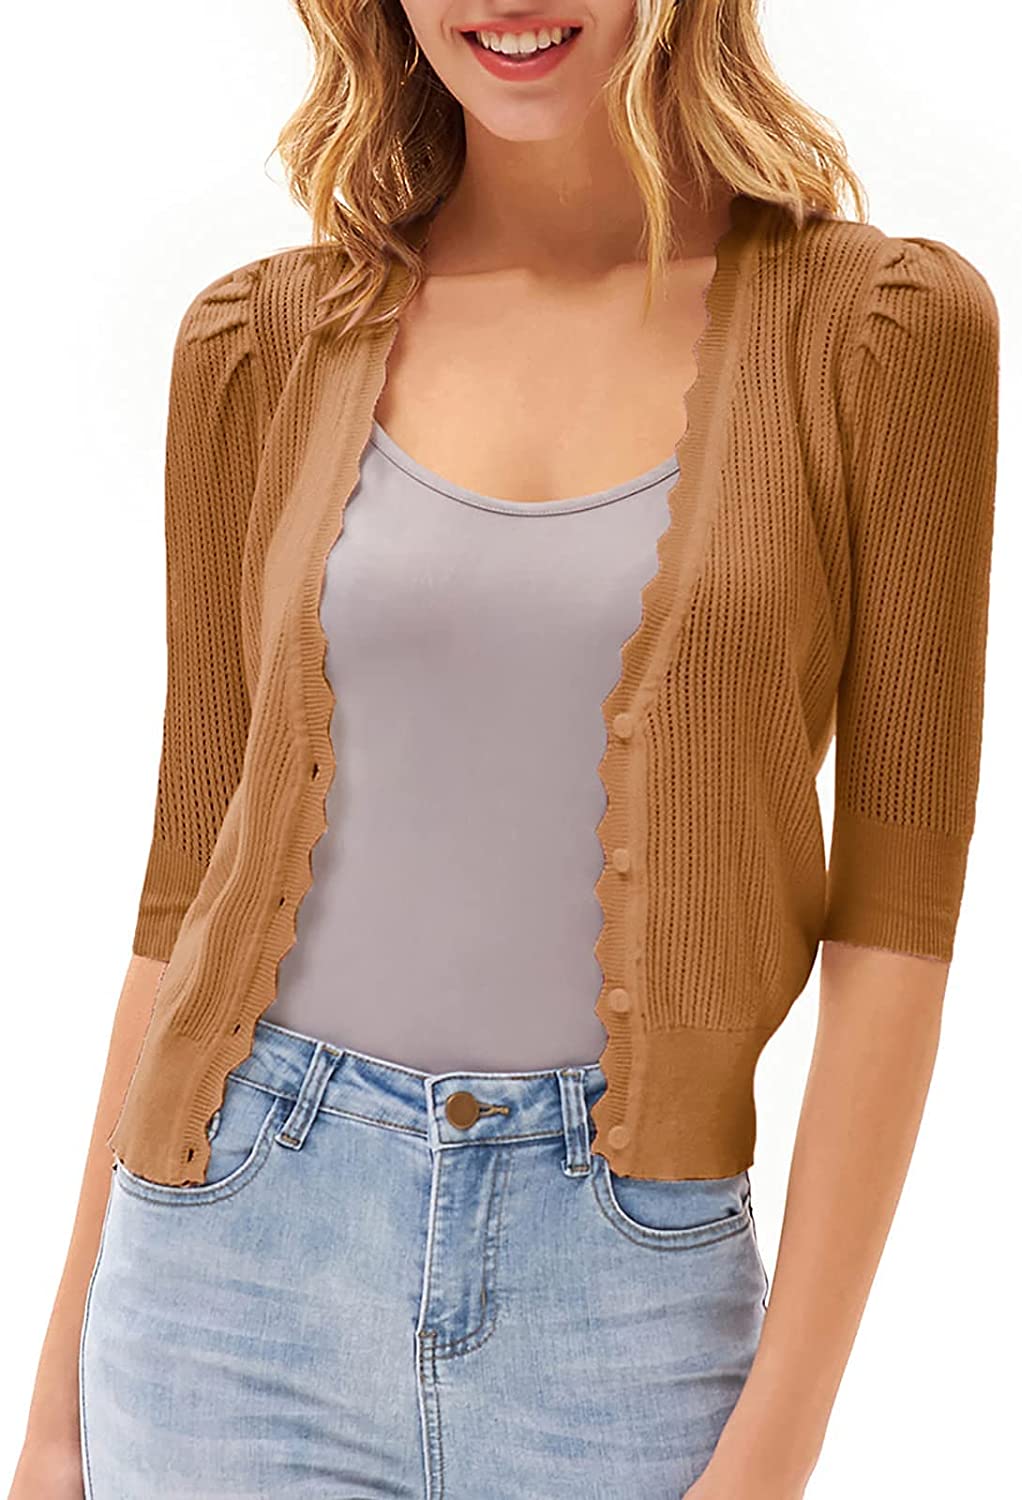  GRACE KARIN Womens Ribbed Open Front Cardigan